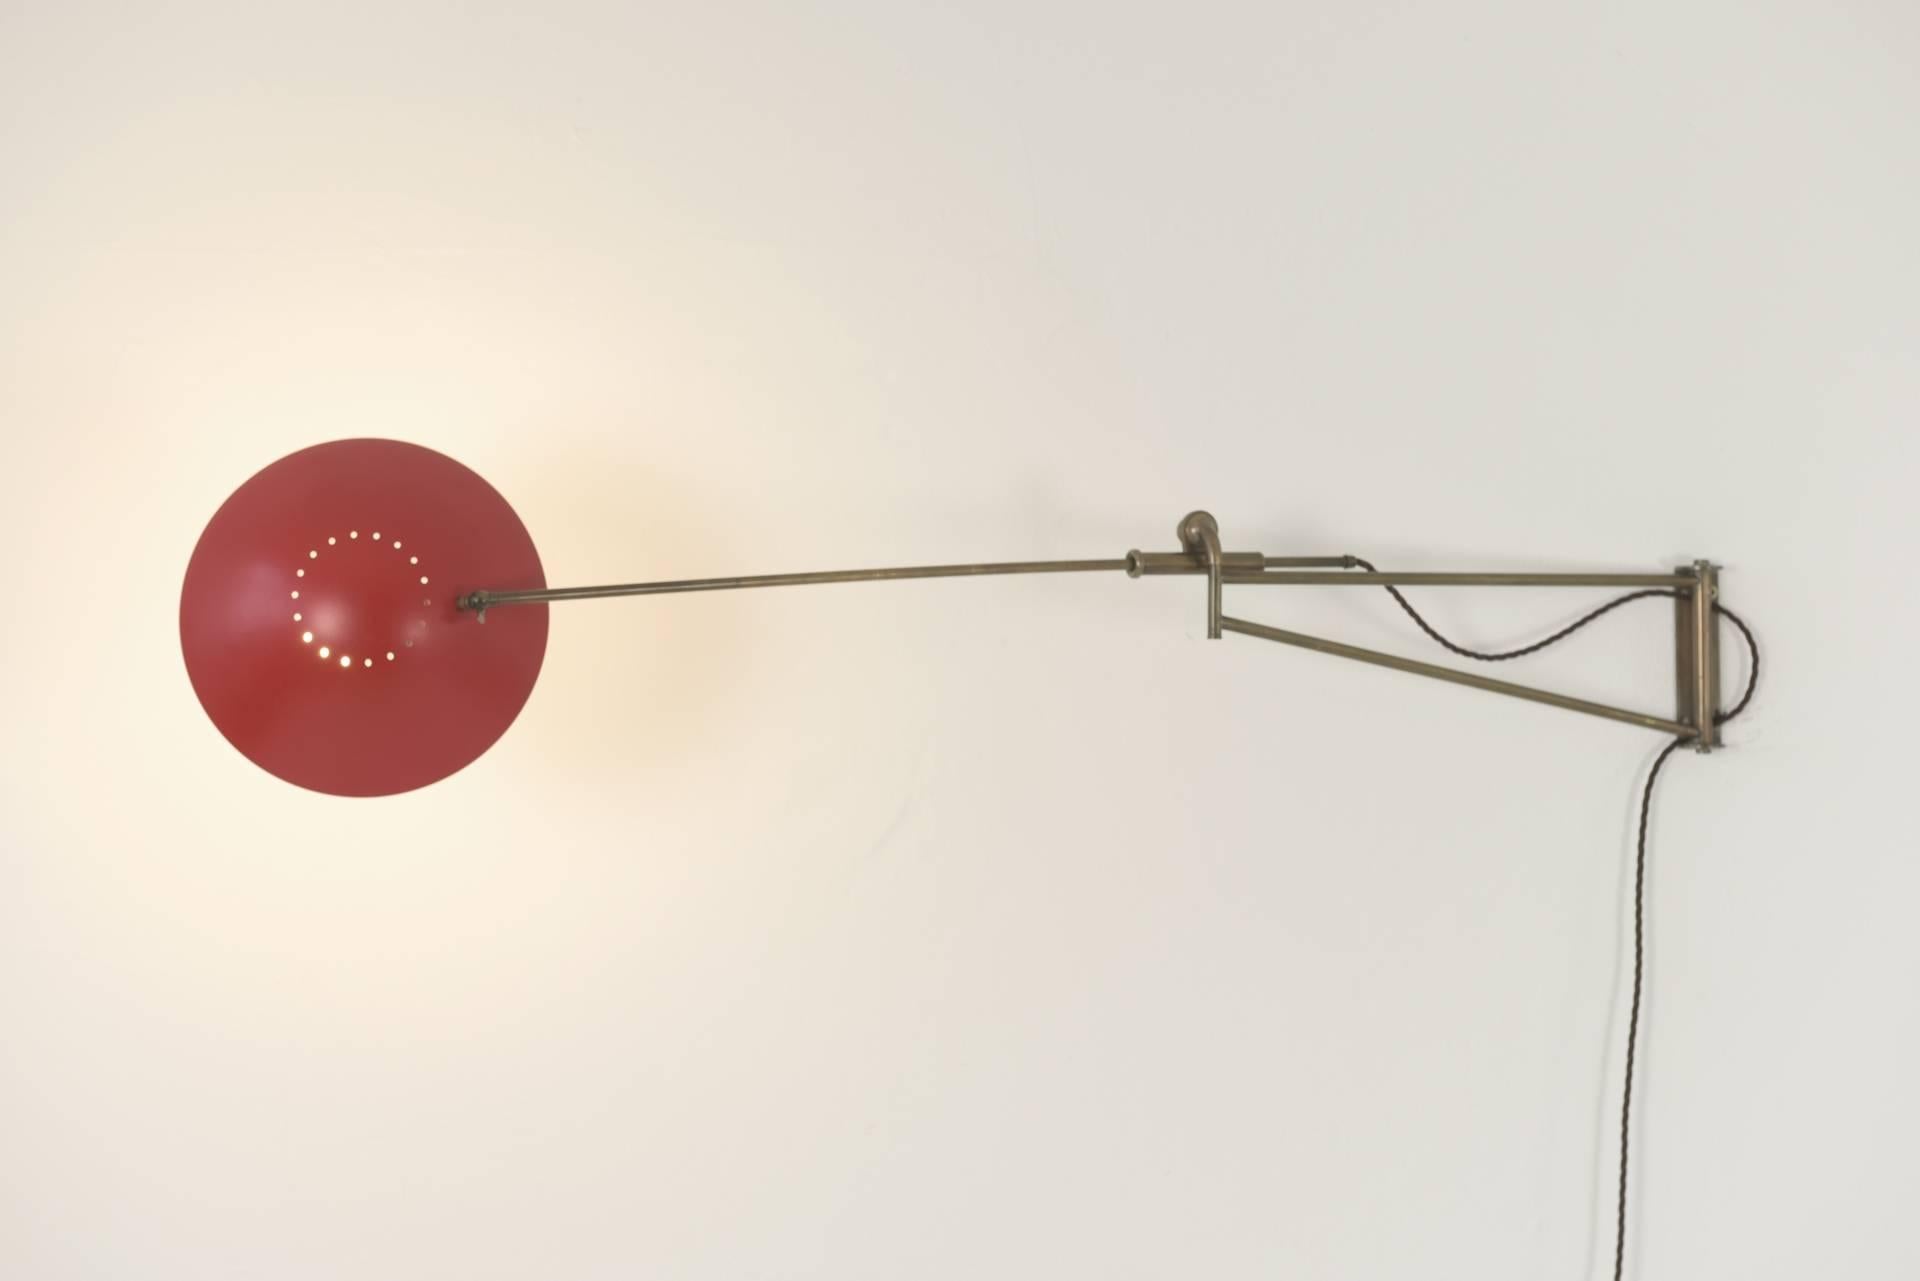 A multi-adjustable light, as indirect room lighting on the wall, as a direct over a table or as a reading light to the chair. Many in-depth options provide this ingenious, solid design. A Luminaire that can do much and takes up little space, the new